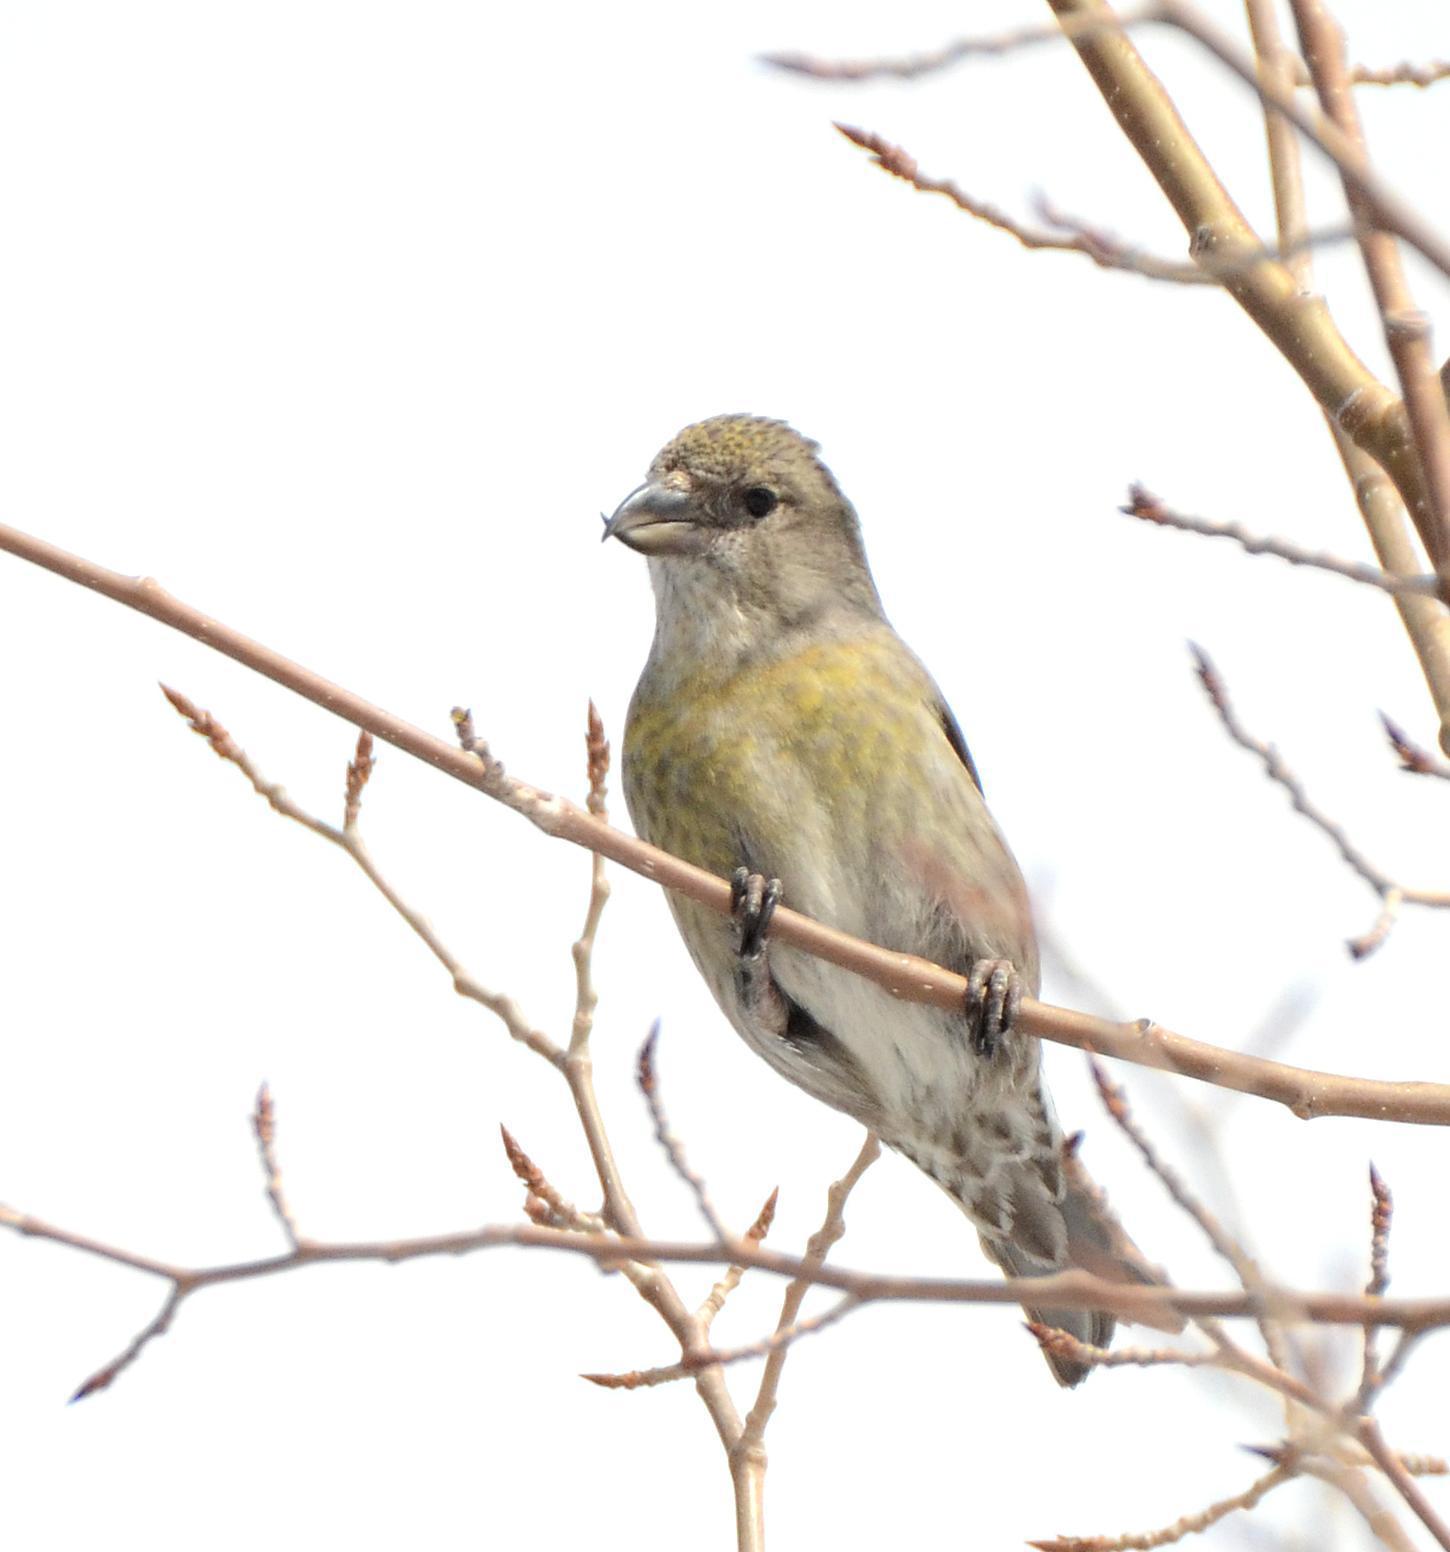 Red Crossbill (Lodgepole Pine or type 5) Photo by Steven Mlodinow